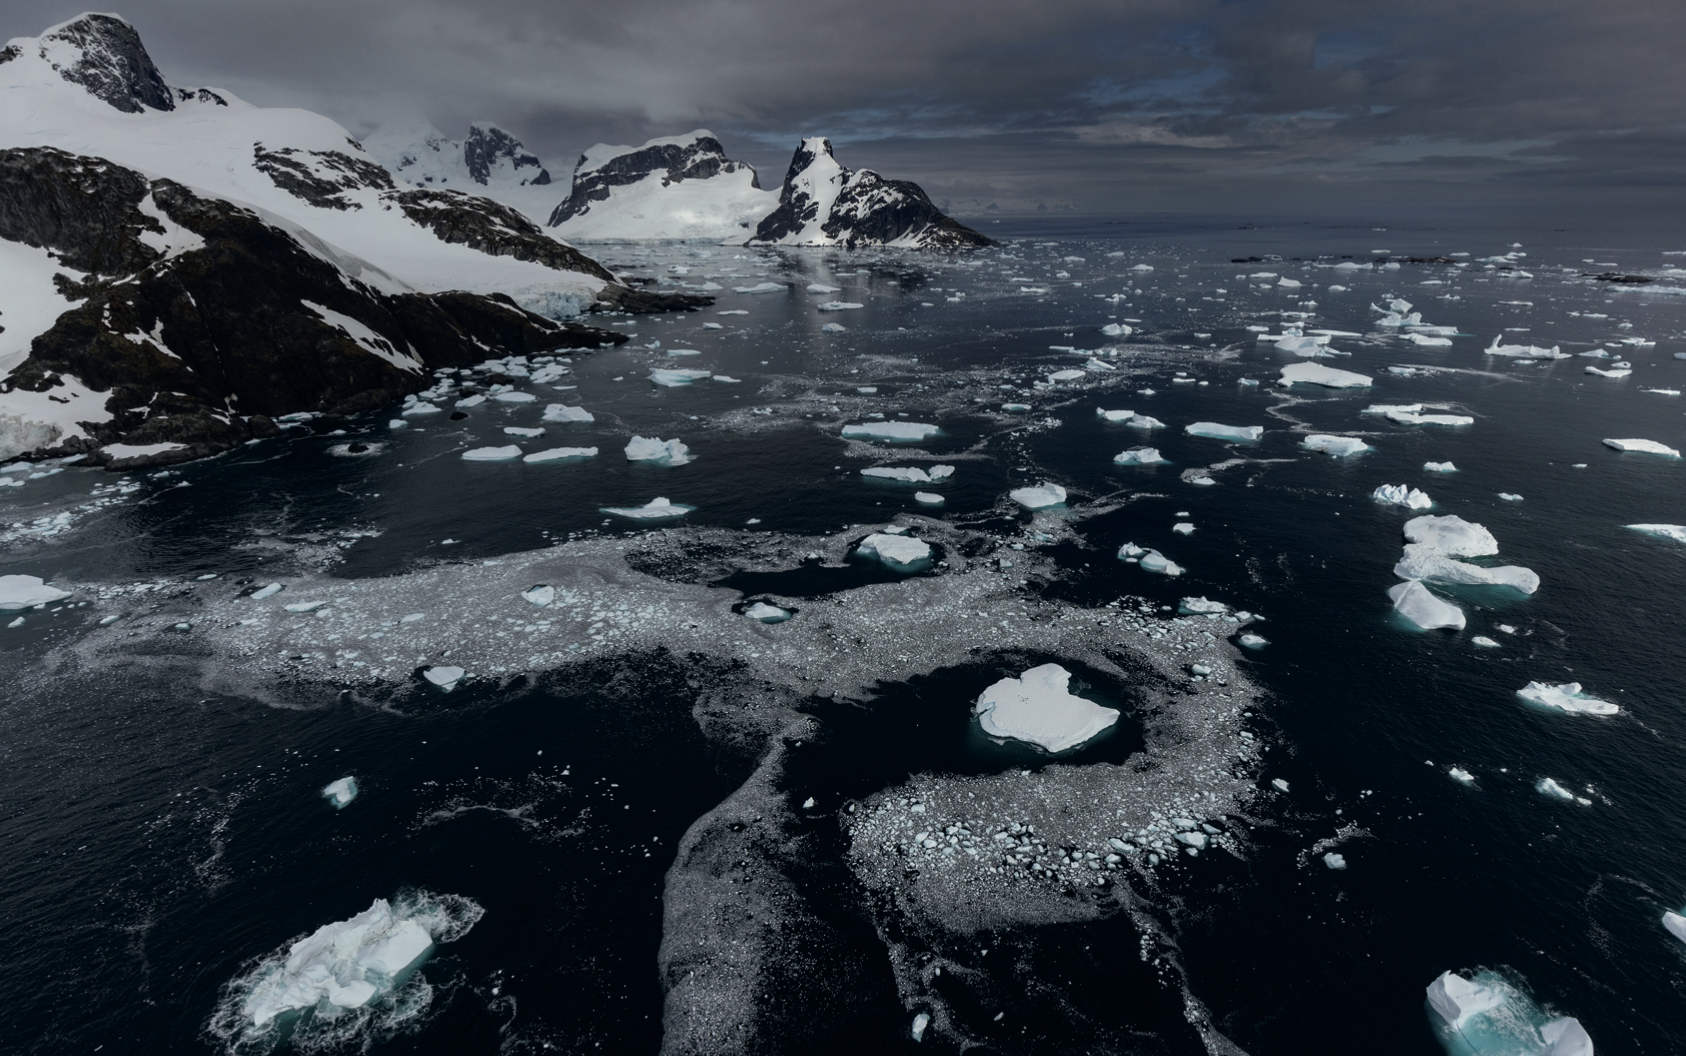 Aerial photograph of the sea withicebergs scattered over it and snowy mountains in the distance taken from a helicopter flying over Cape Tuxen, Antarctica.